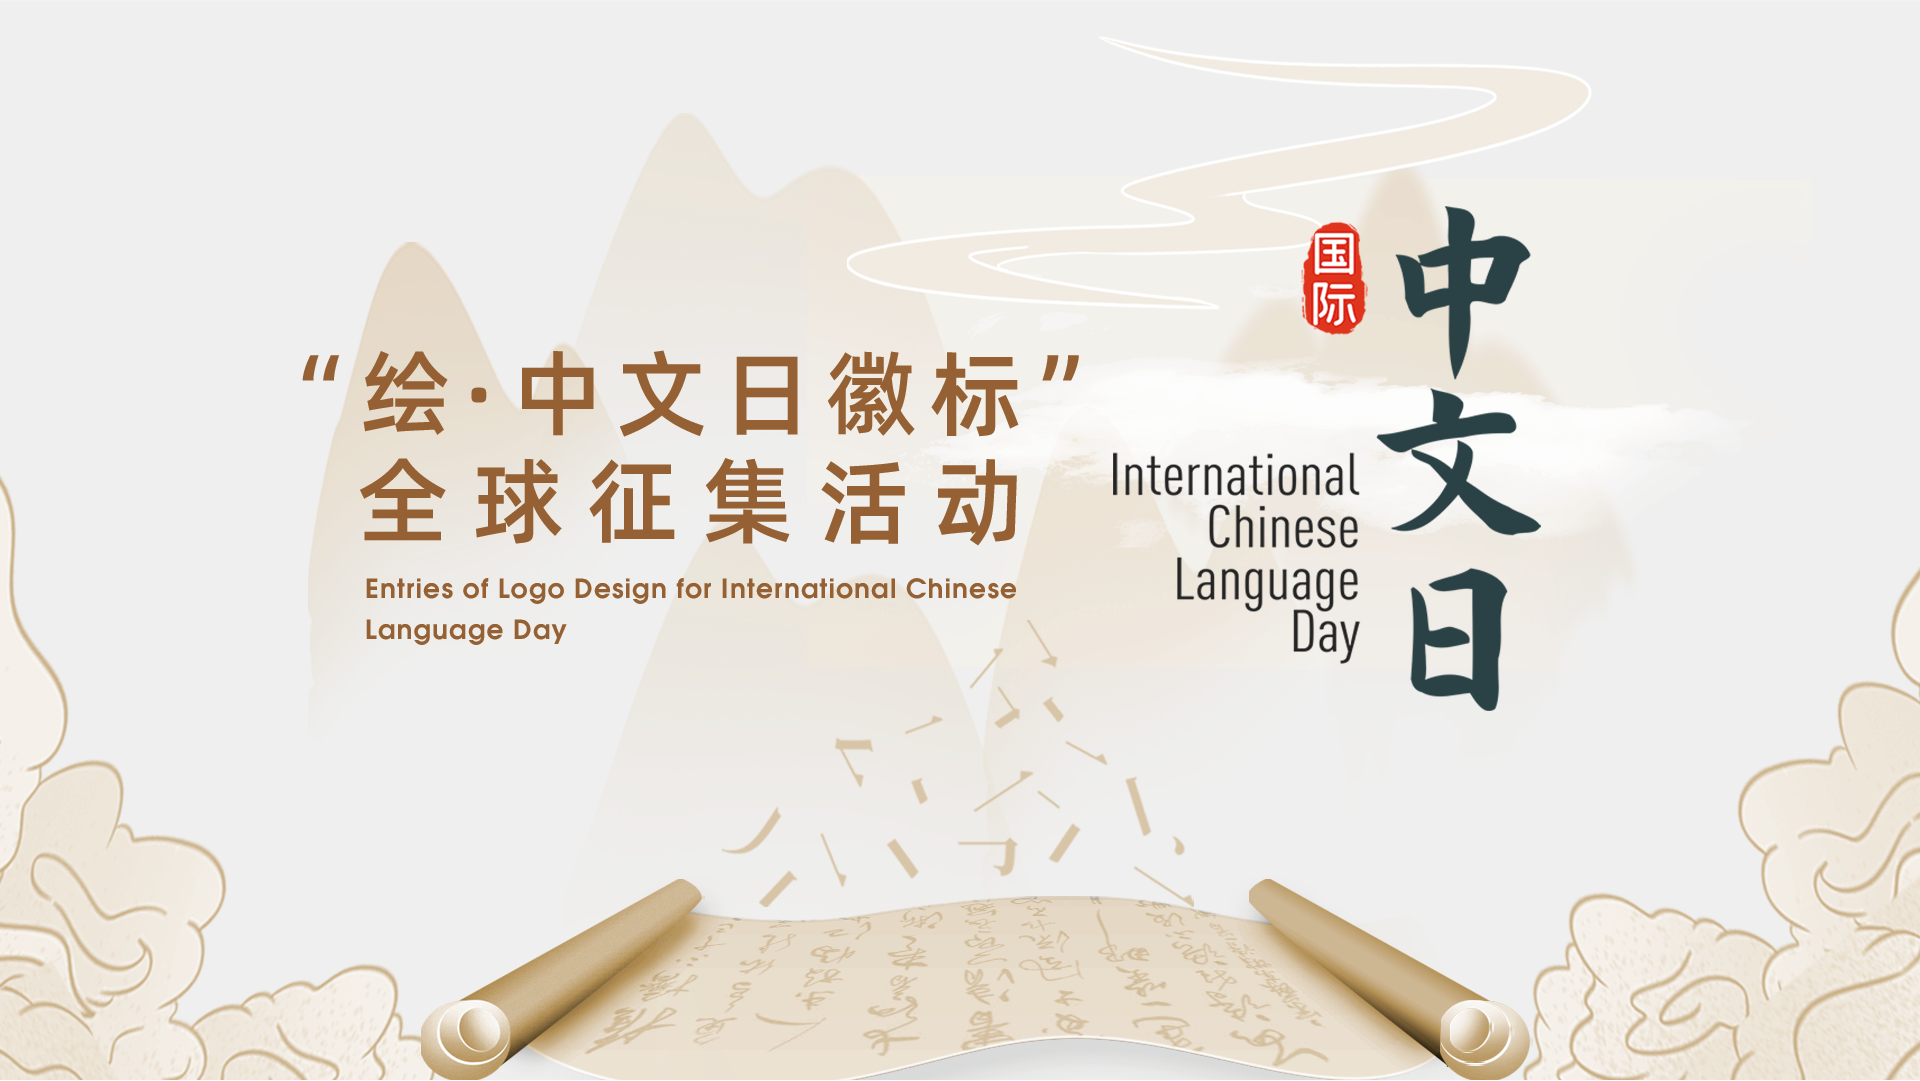 Call for Entries of Logo Design for International Chinese Language Day